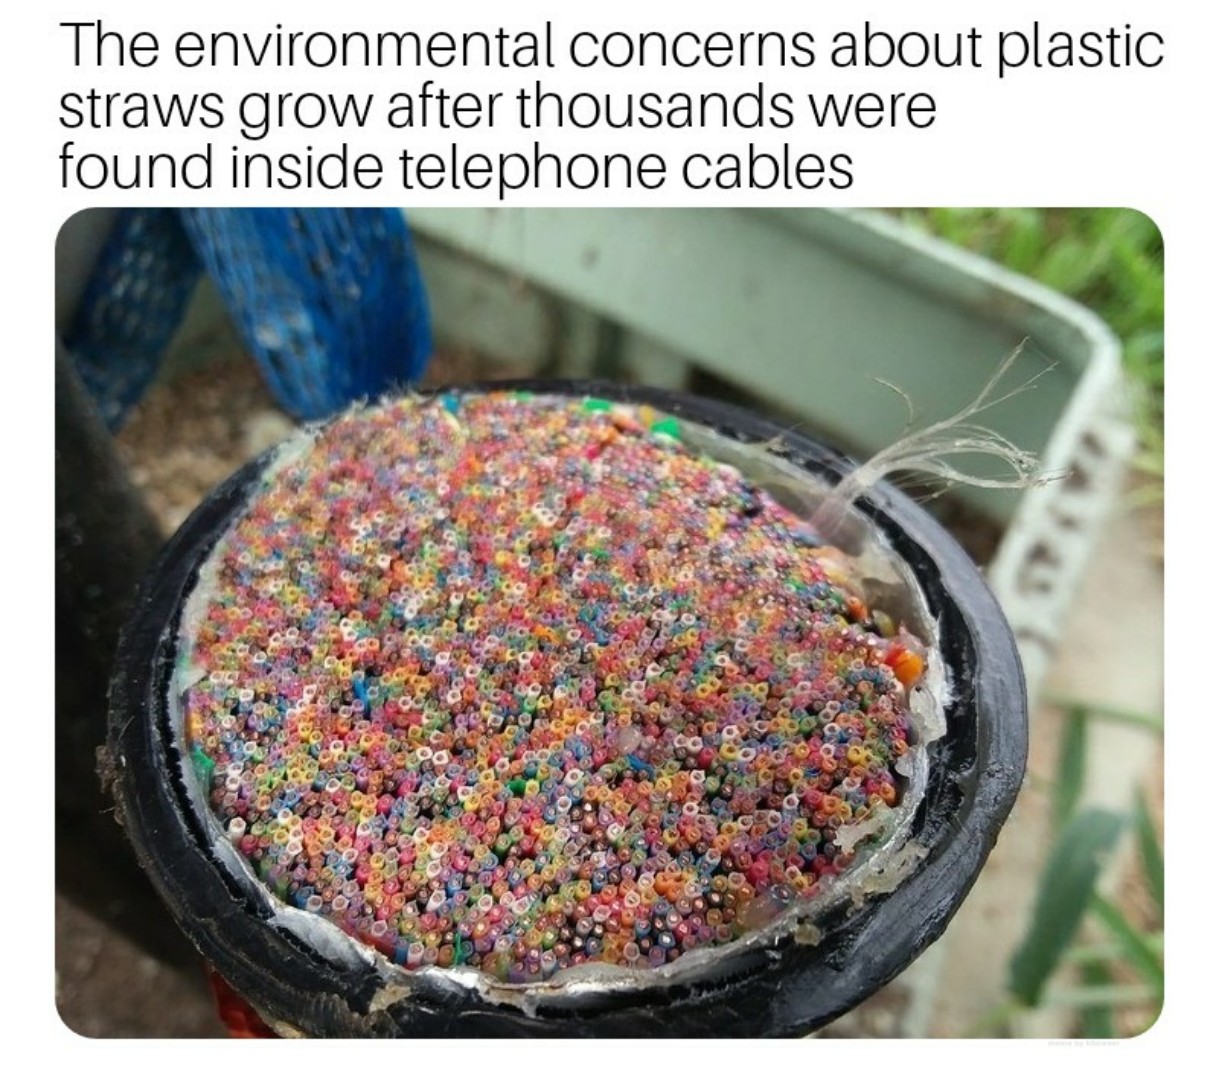 Electrical cable - The environmental concerns about plastic straws grow after thousands were found inside telephone cables